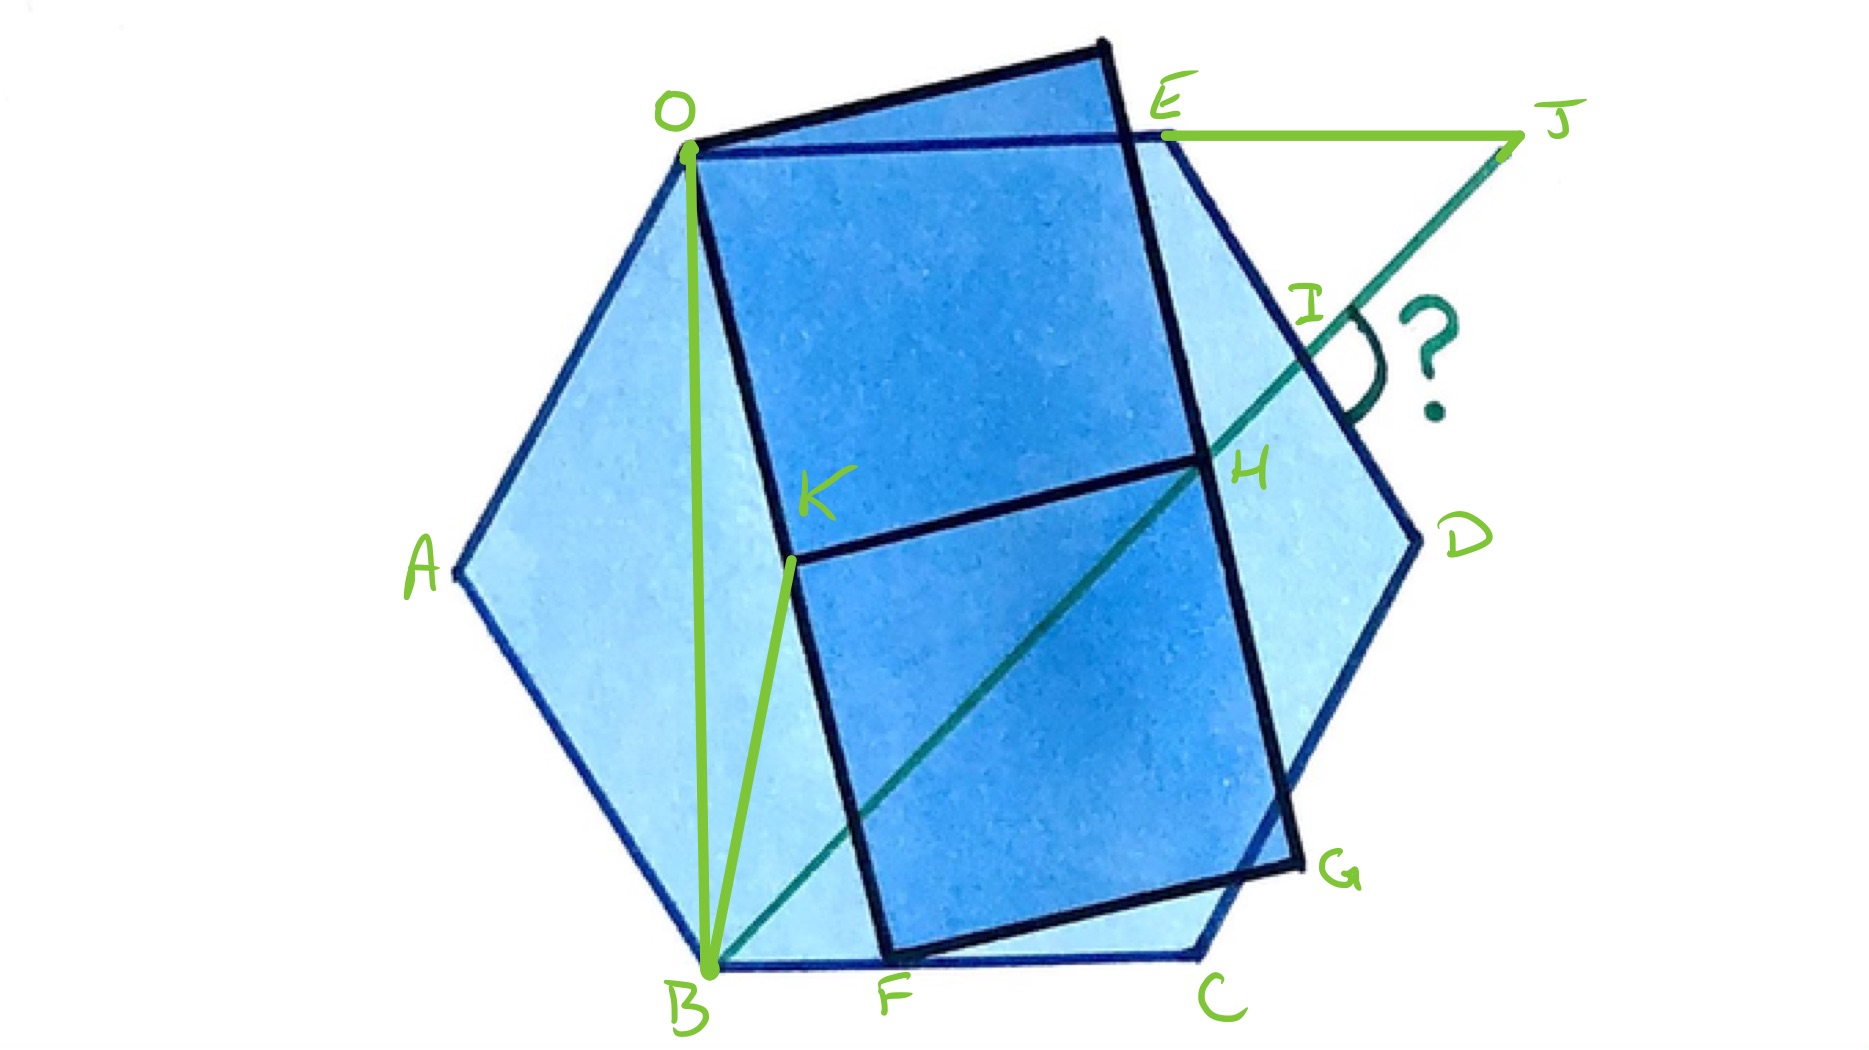 Two squares on a hexagon labelled